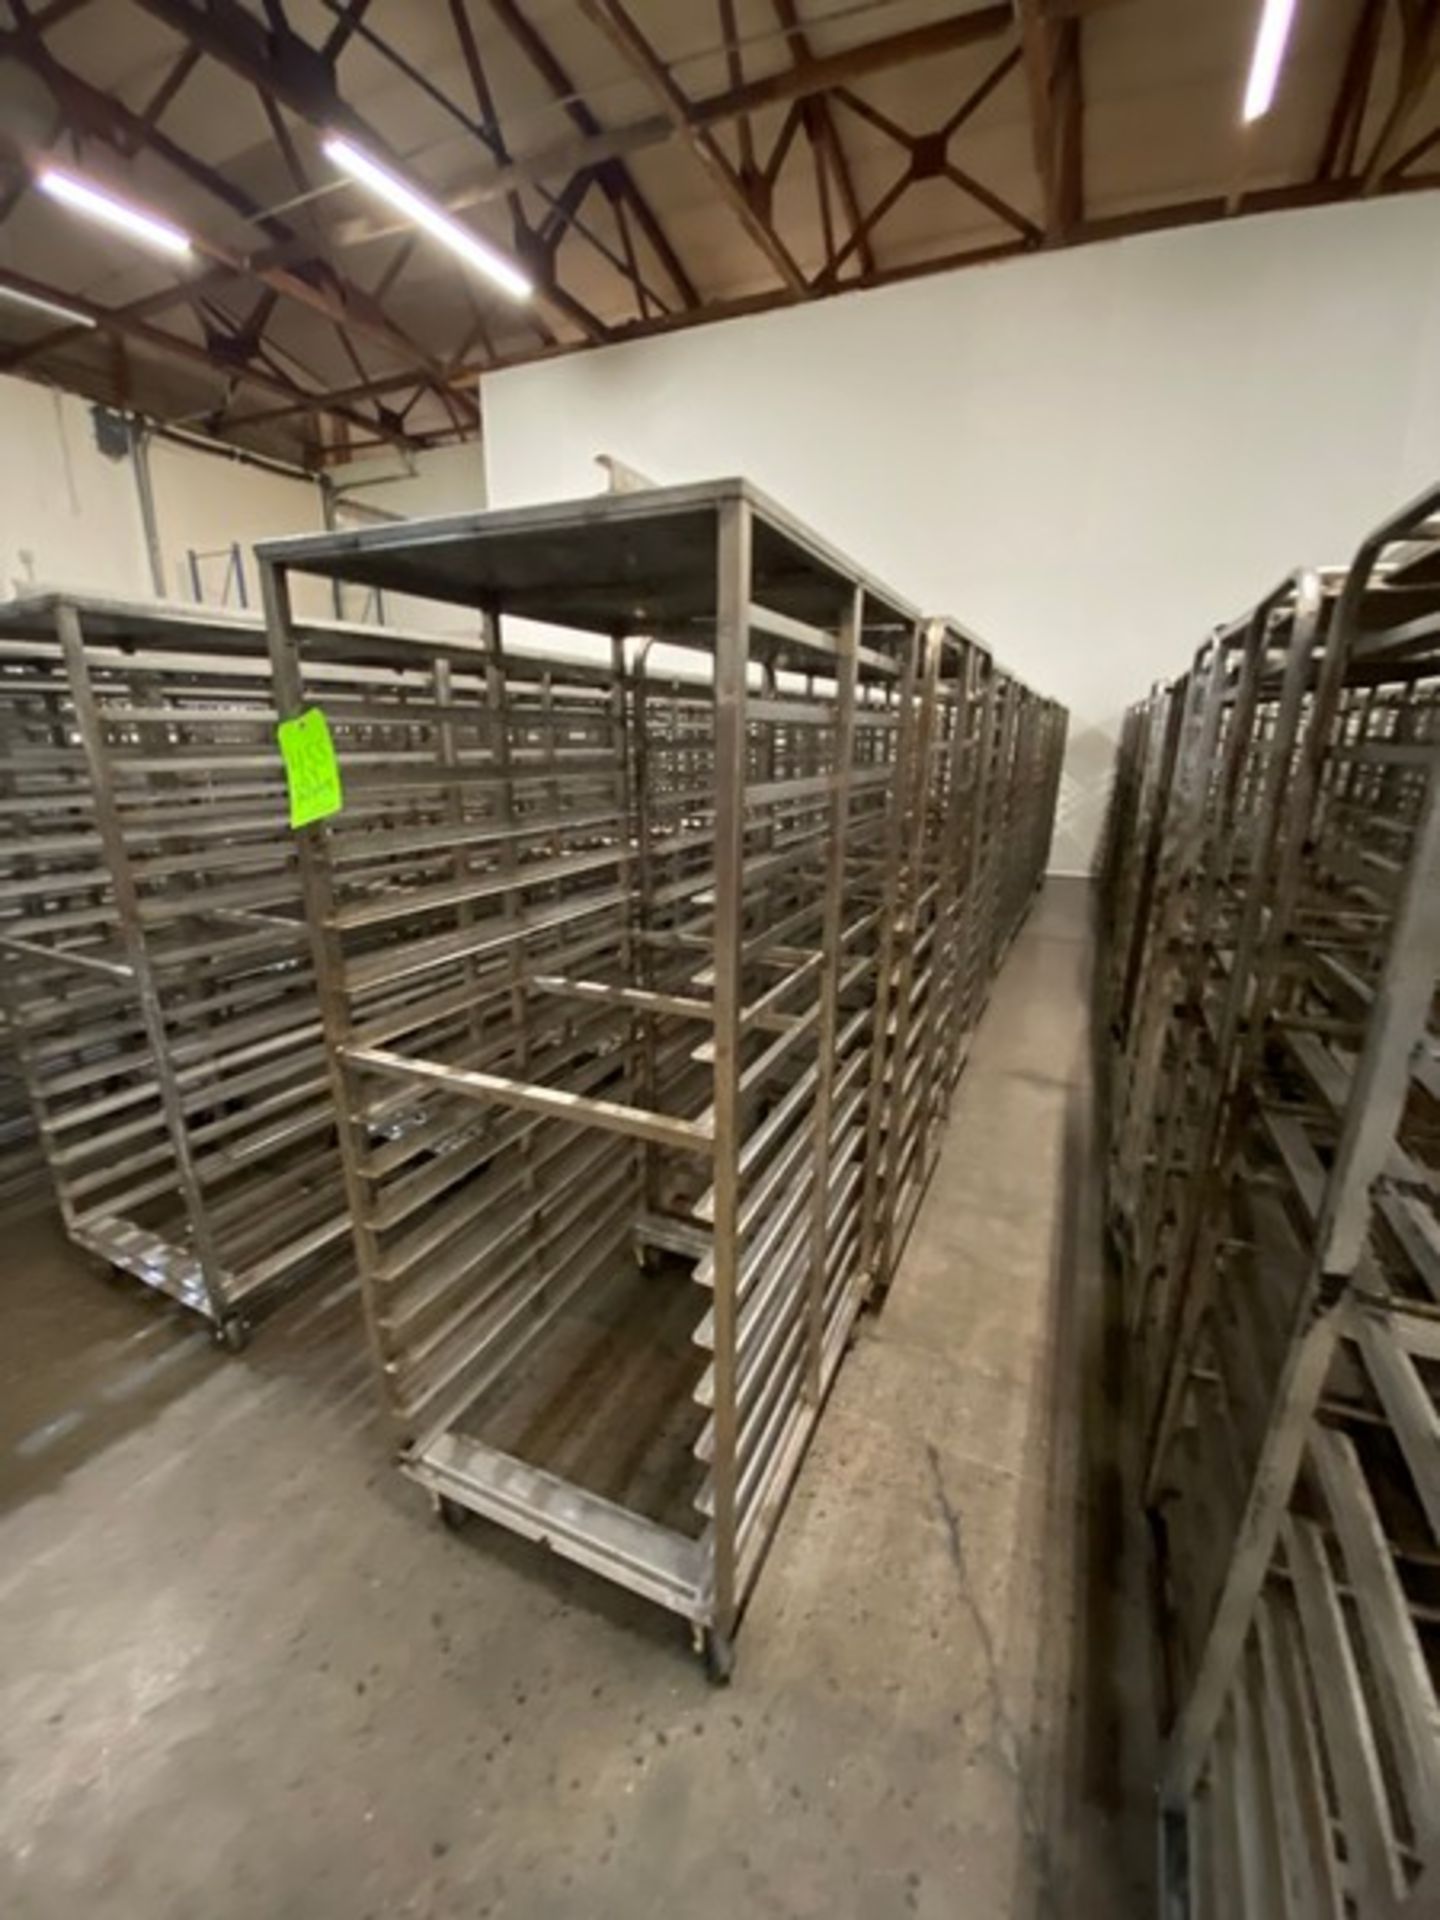 (9) BAKING PAN RACKS, MOUNTED ON CASTERS (LOCATED IN CALLERY, PA) - Image 2 of 2